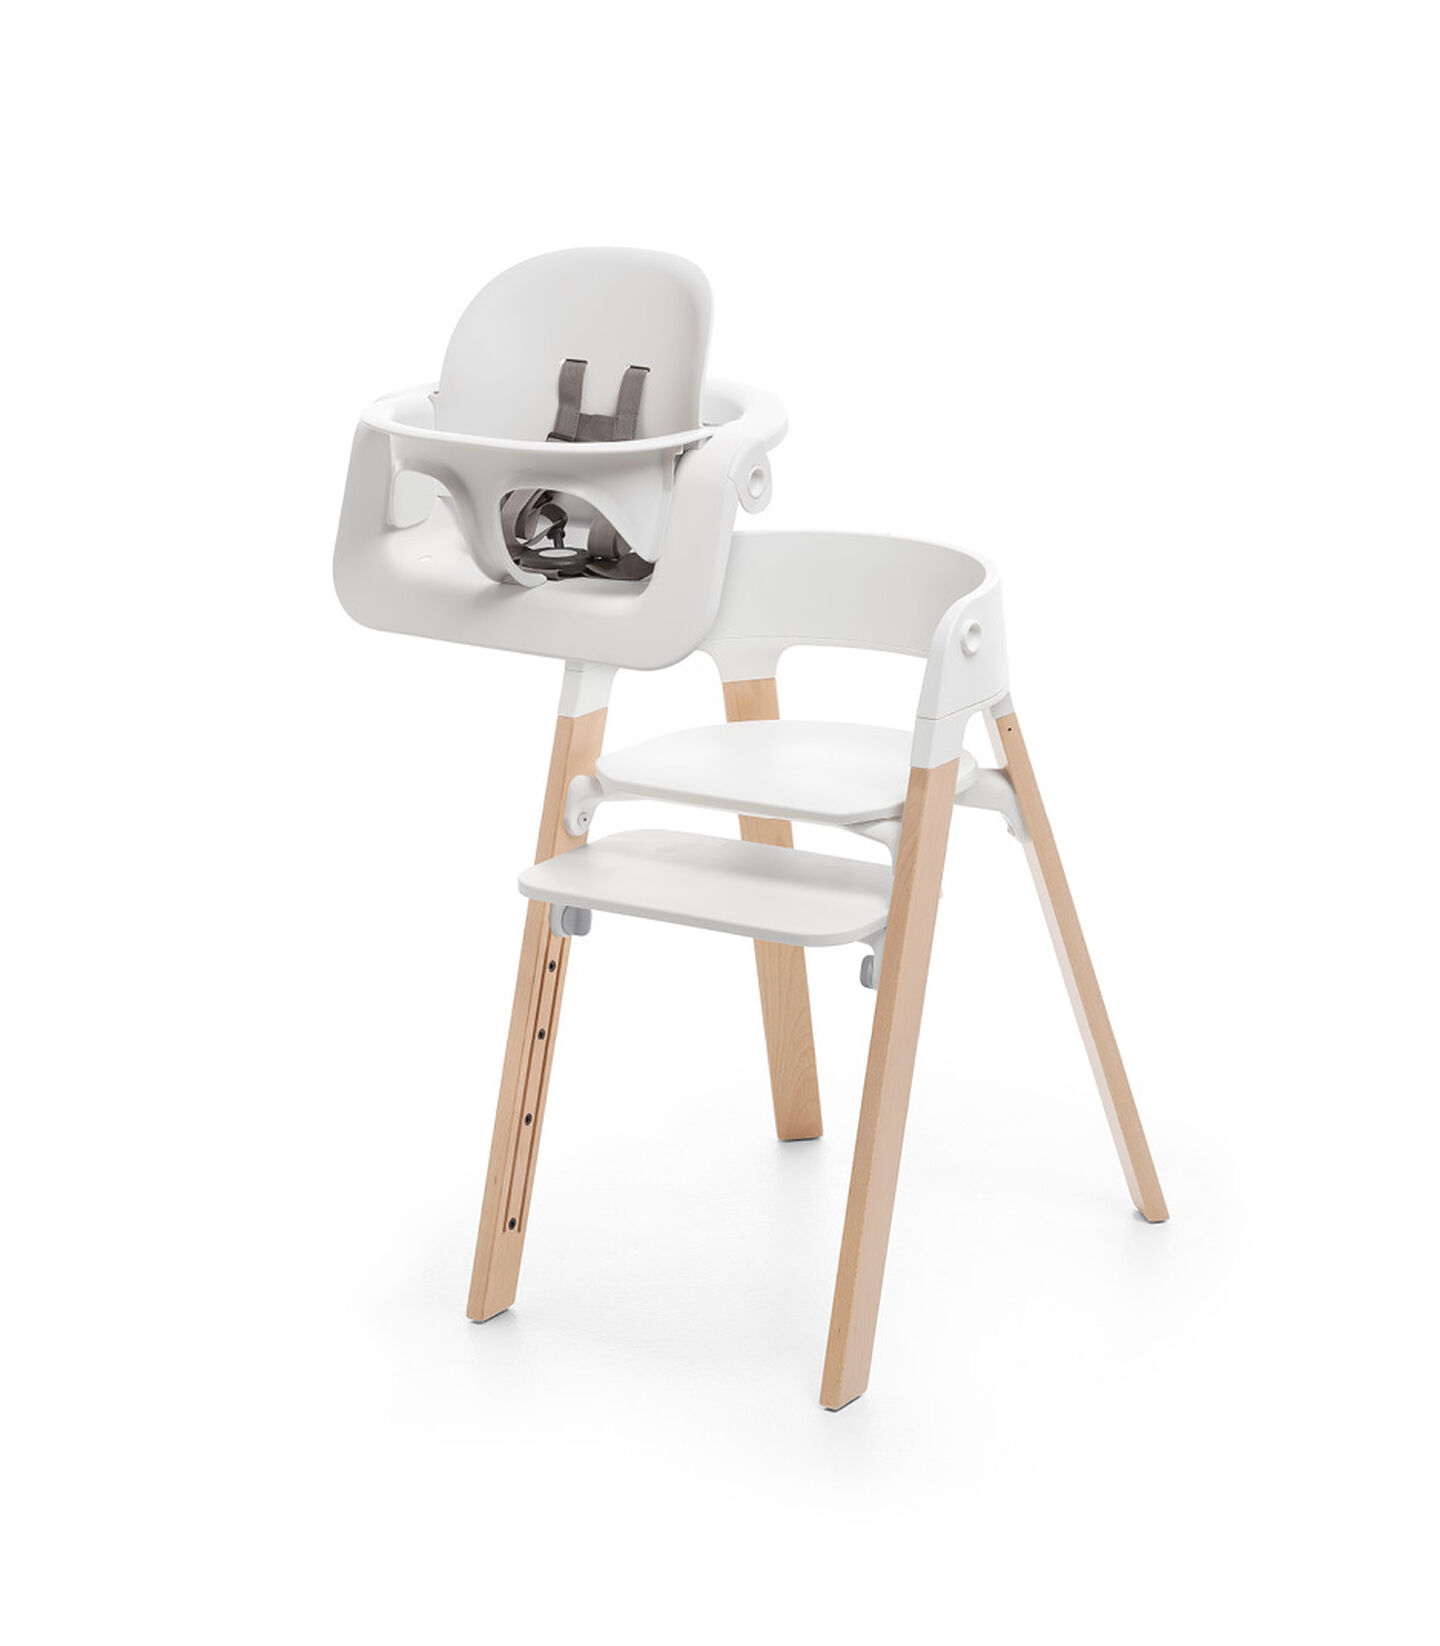 Stokke® Steps™ Bundle, Chair and Baby Set, Beech Natural wood legs and White plastic parts. view 2